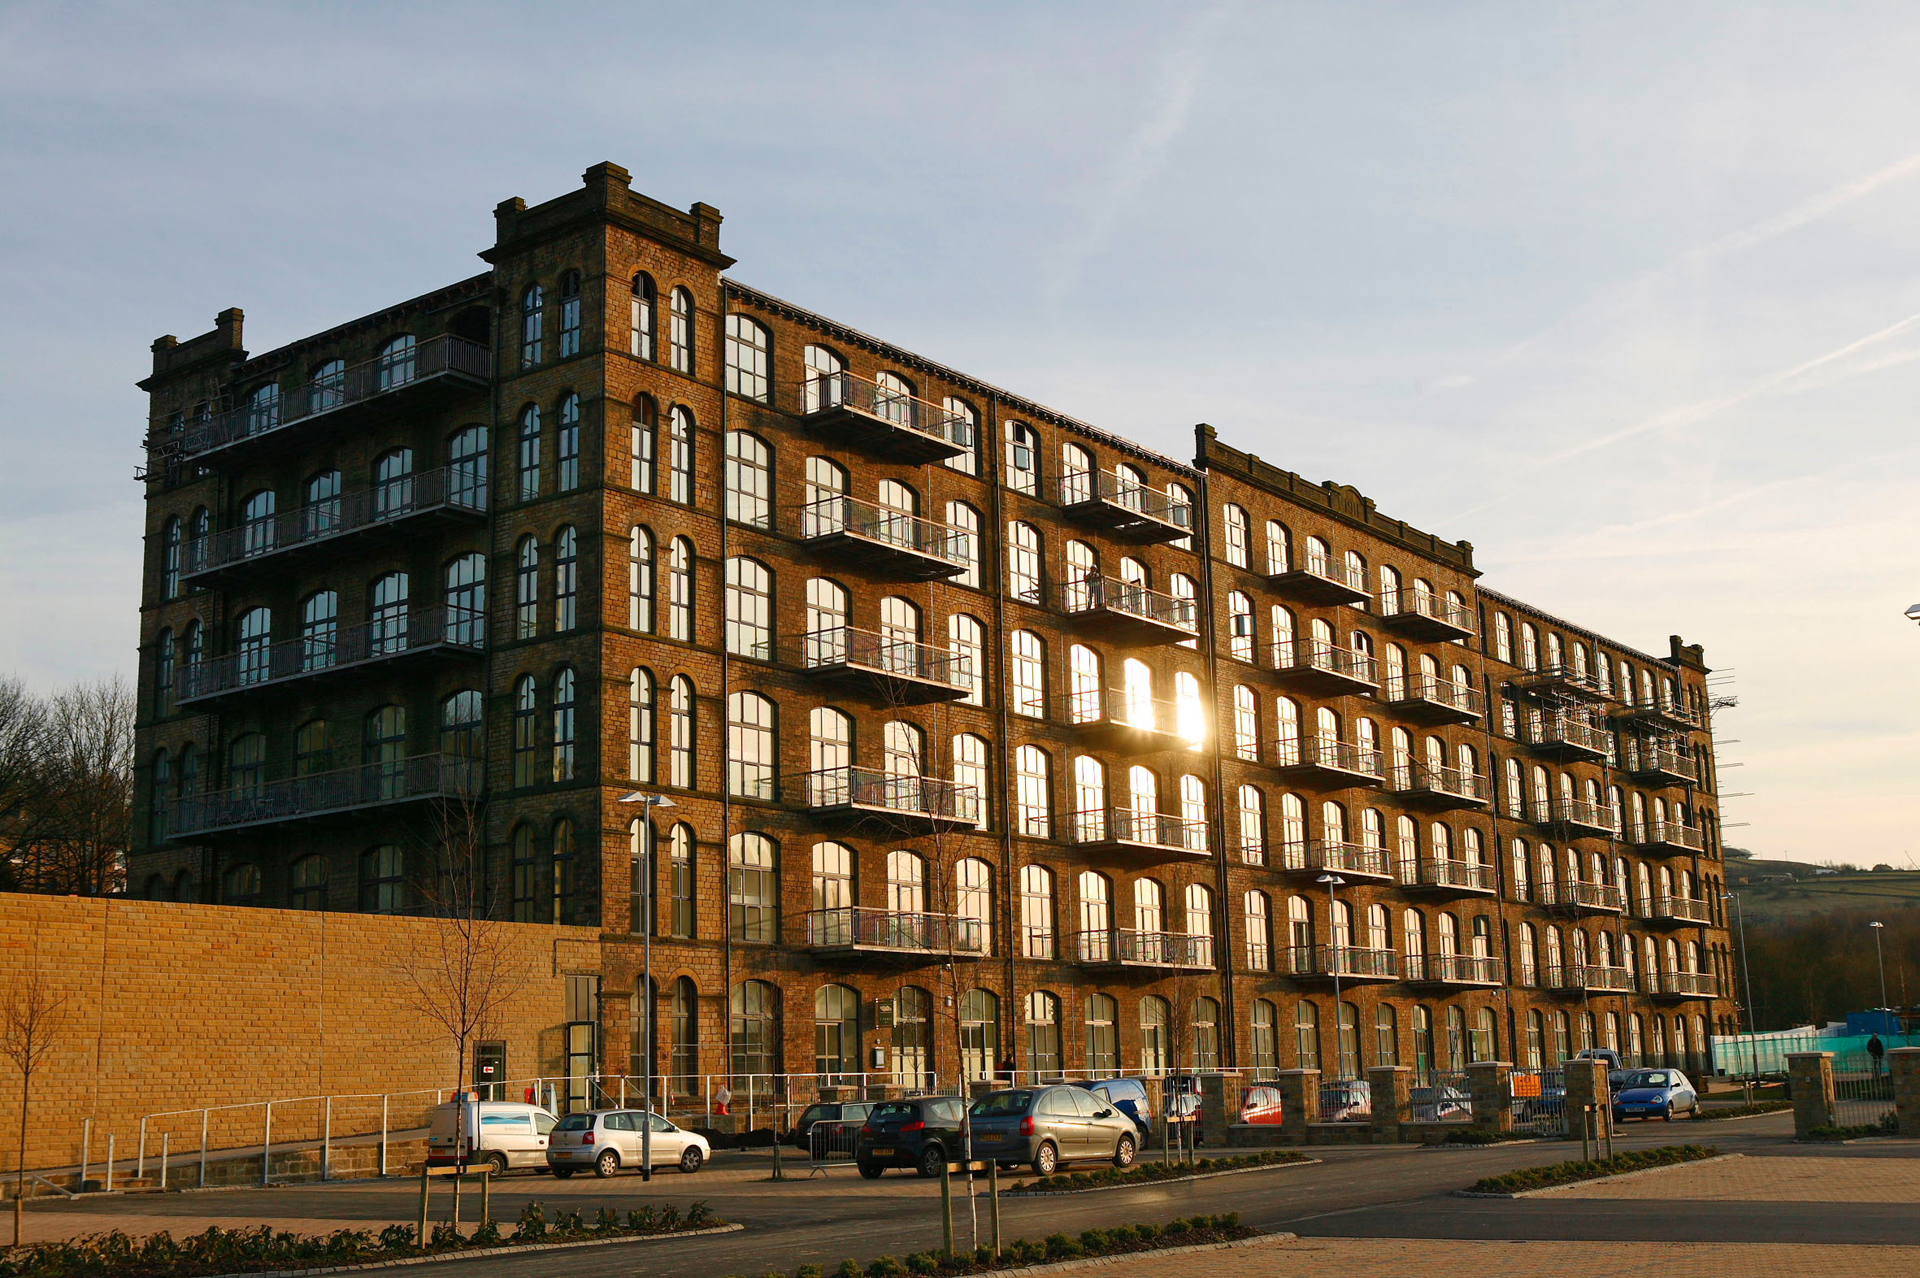 The exterior of Titanic Spa, previously a textile mill